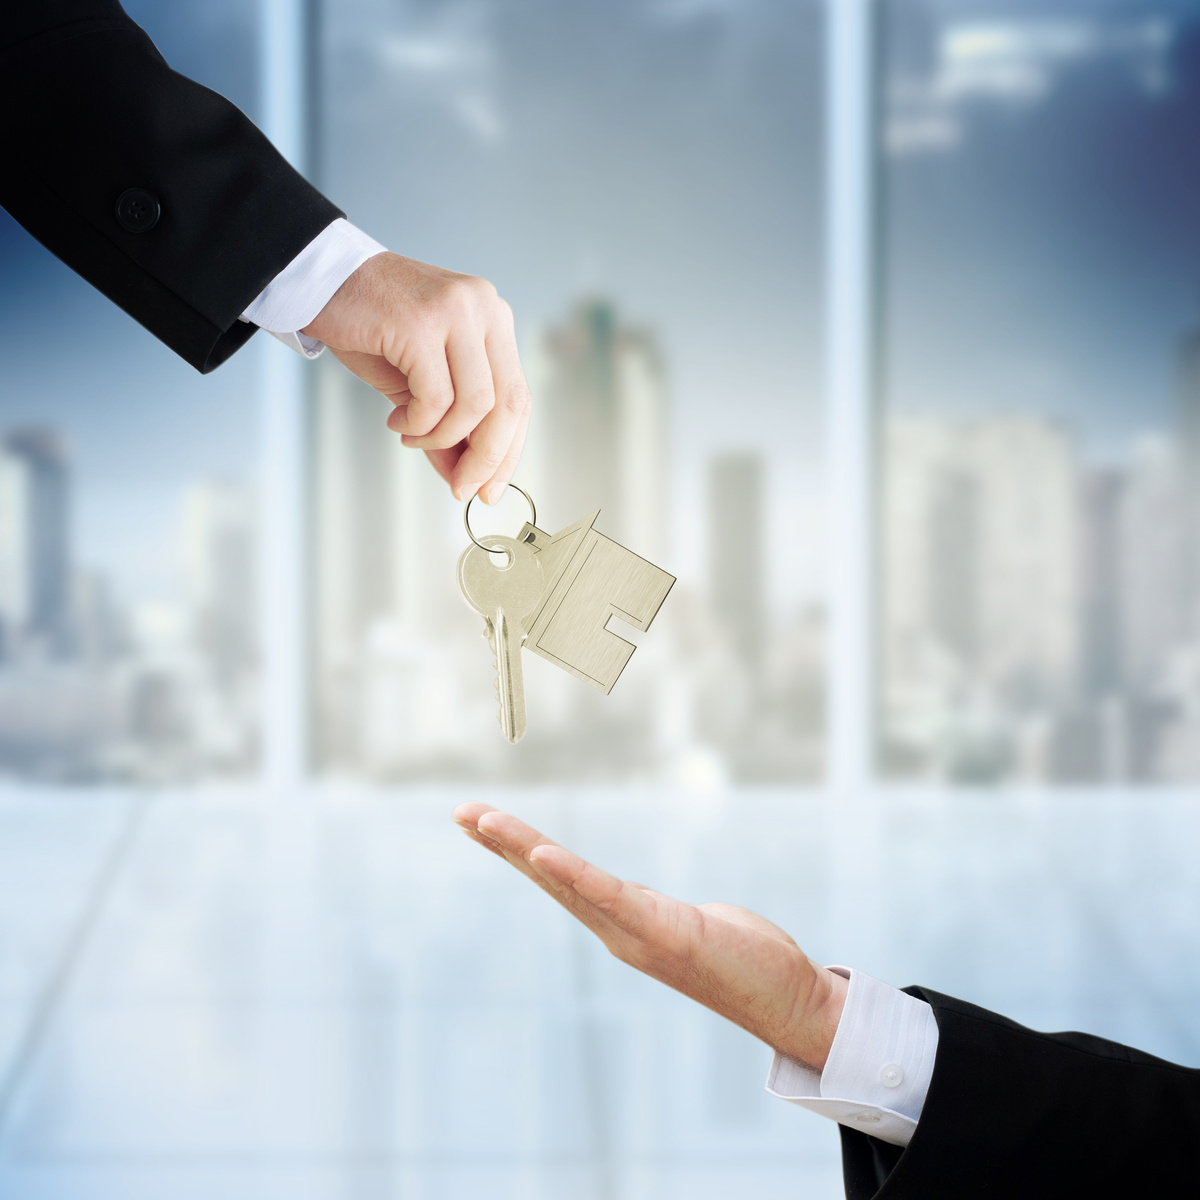 Concept of real estate transactions